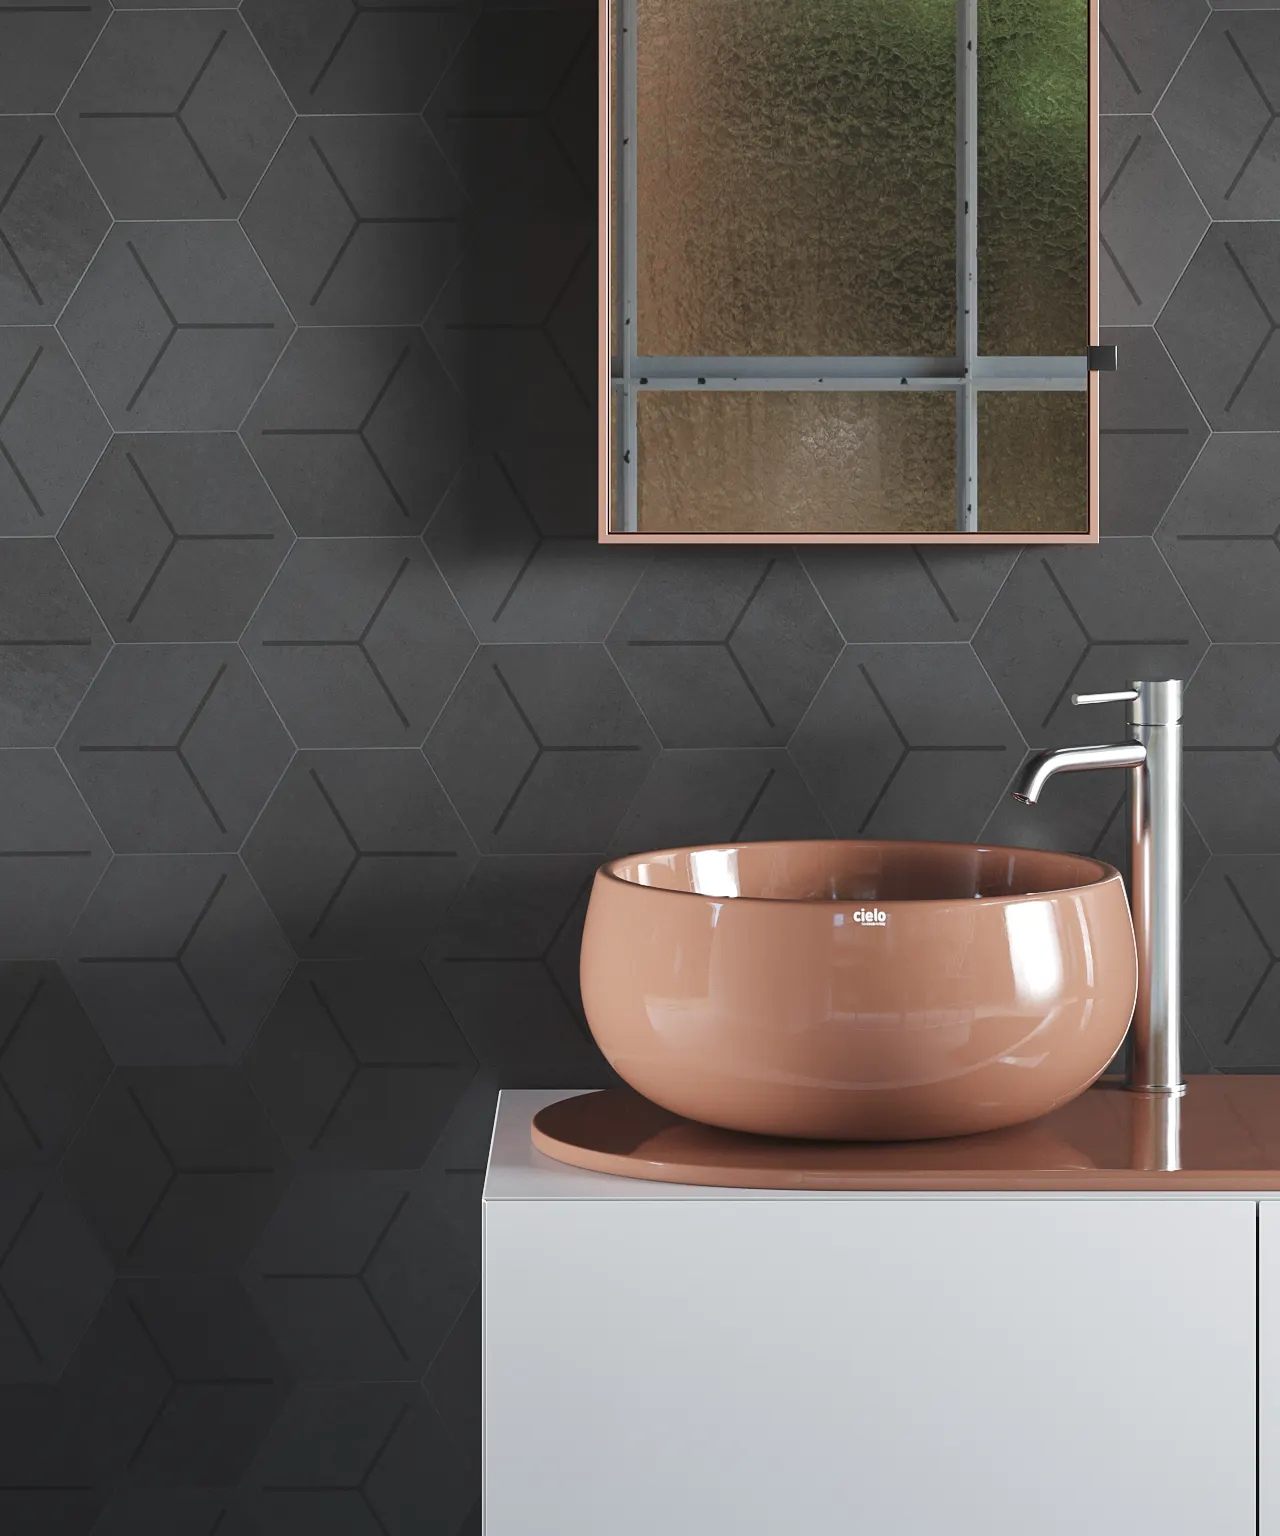 Black hexagon tiles decorated with cube design inspiration